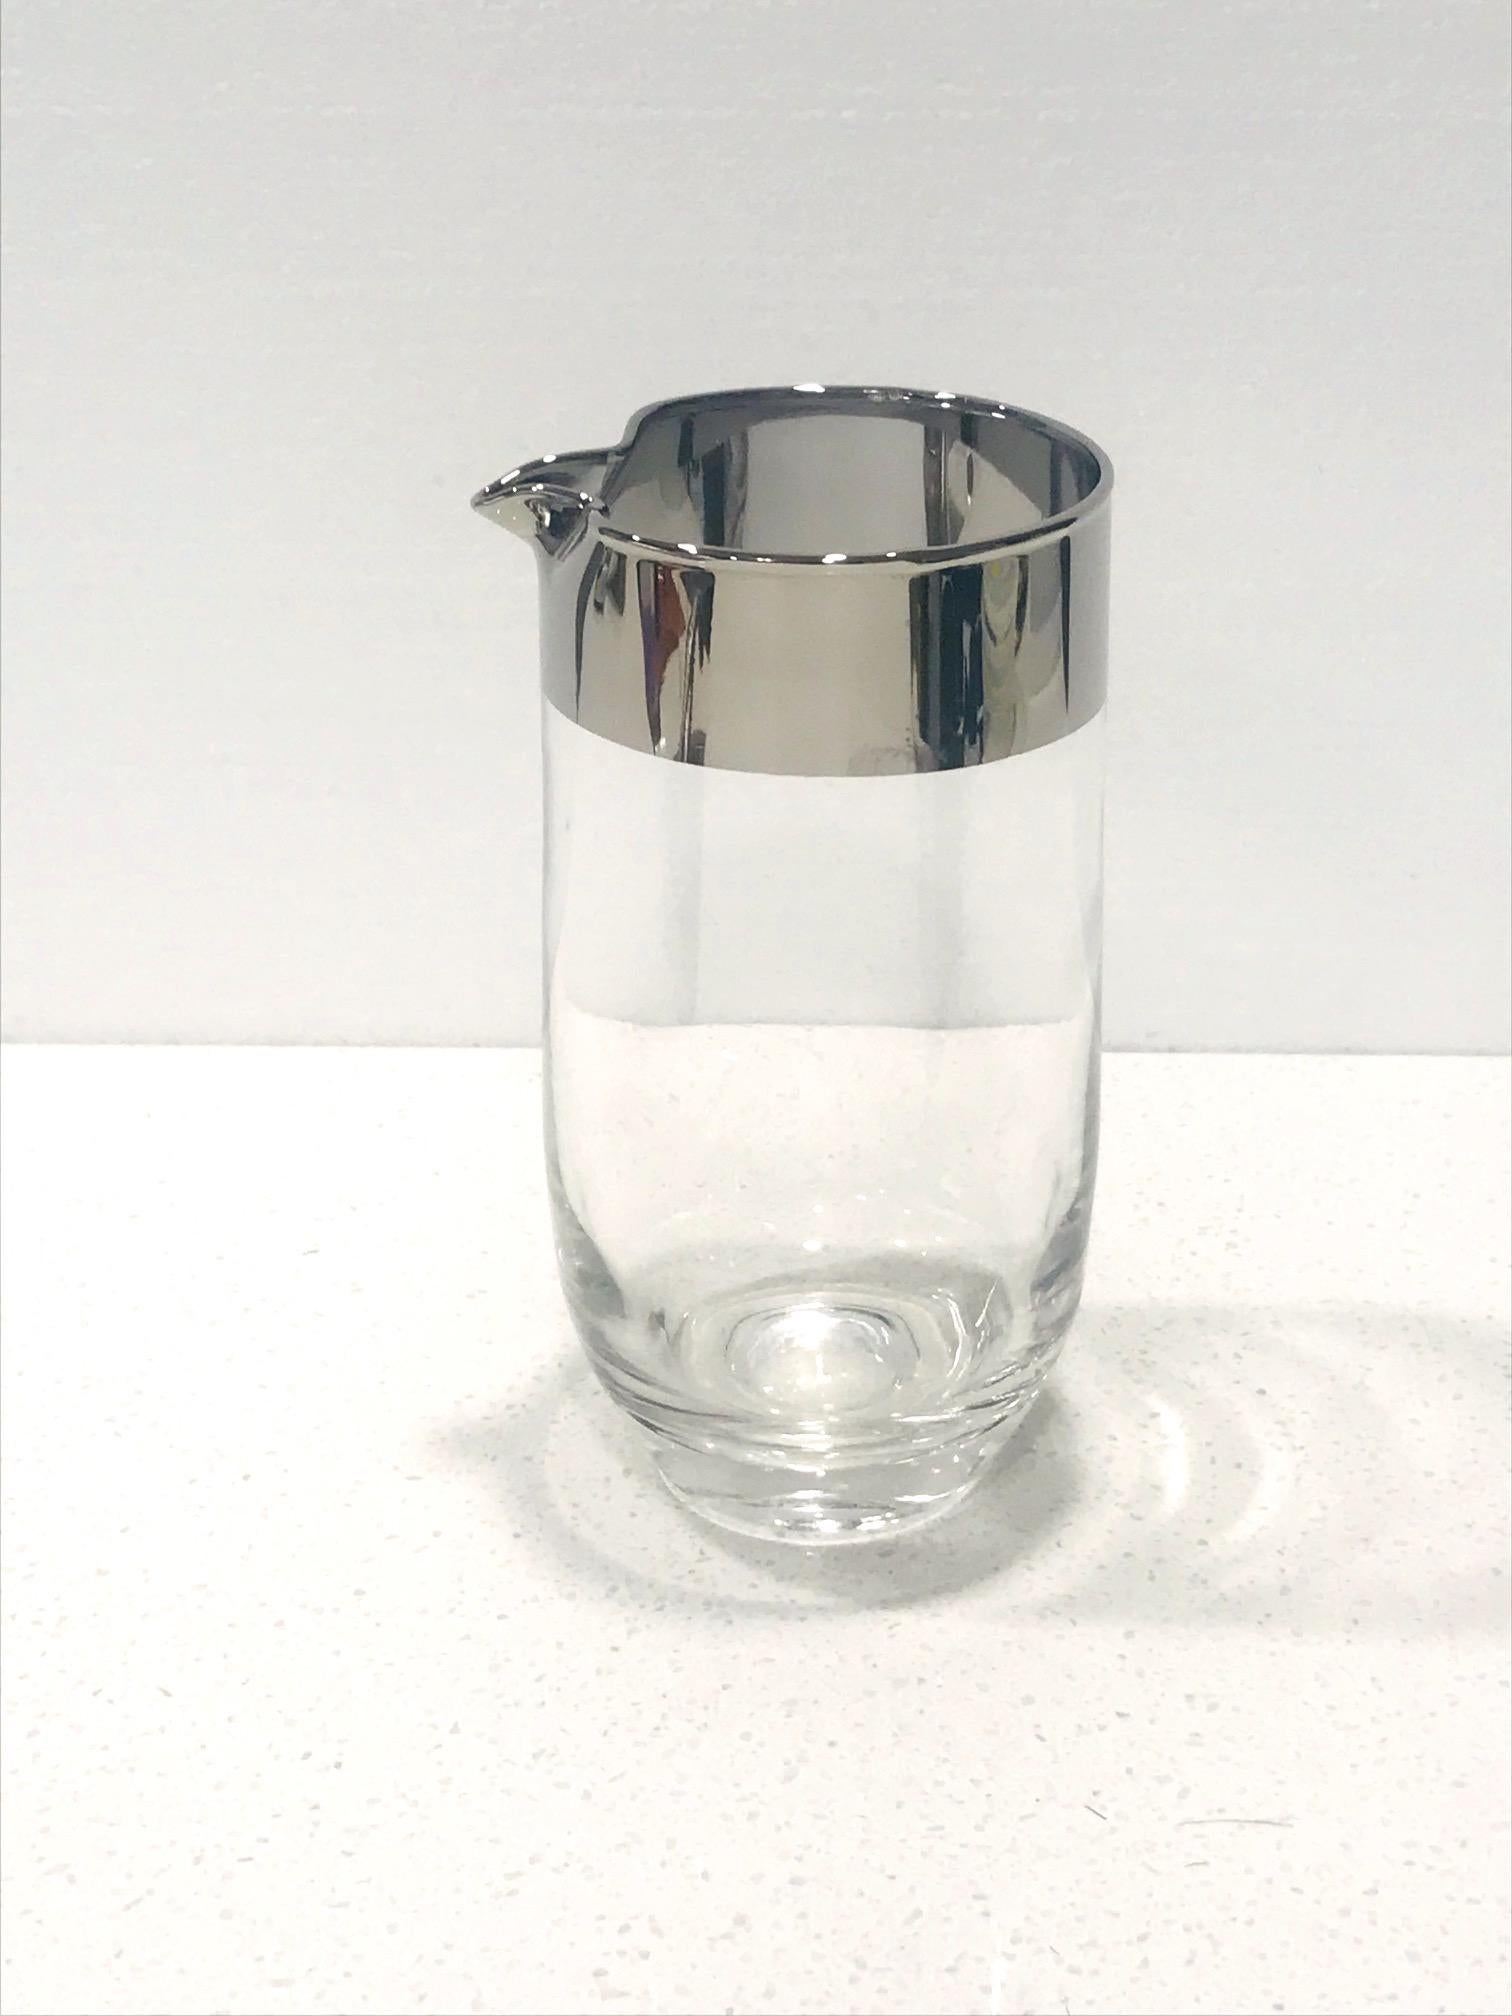 American Mid-Century Modern Cocktail Mixer with Silver Overlay by Dorothy Thorpe